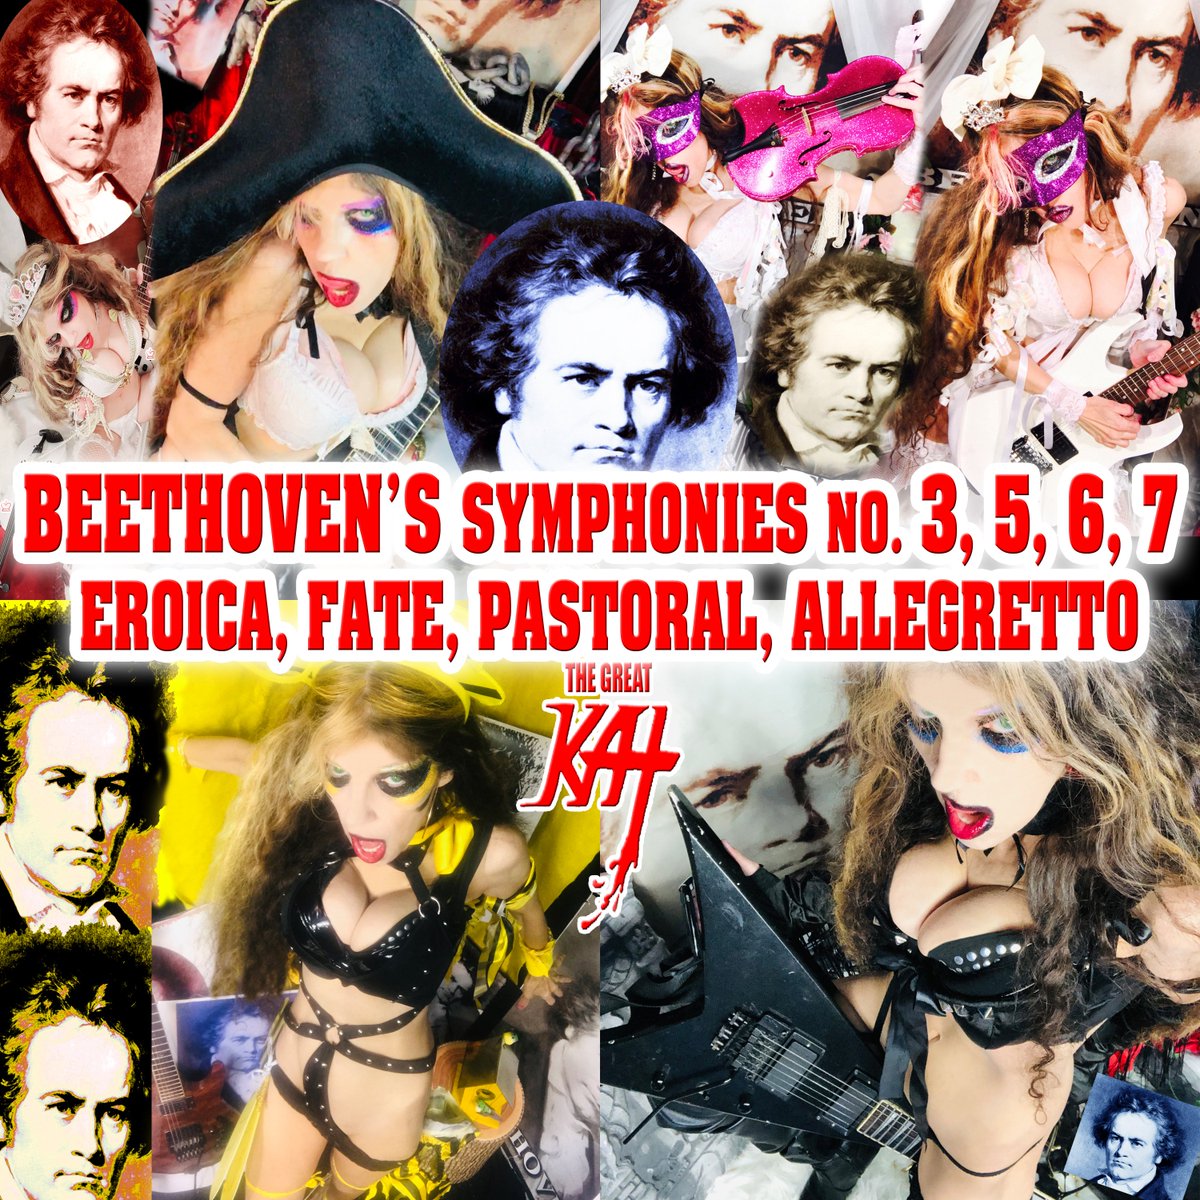 NEW ON #SPOTIFY!
Beethoven's Symphonies No. 3, 5, 6, 7 Eroica, Fate, Pastoral, Allegretto - Single by The Great Kat on Spotify
open.spotify.com/album/6rHe3r1q…

#THEGREATKAT #REINCARNATION OF #BEETHOVEN